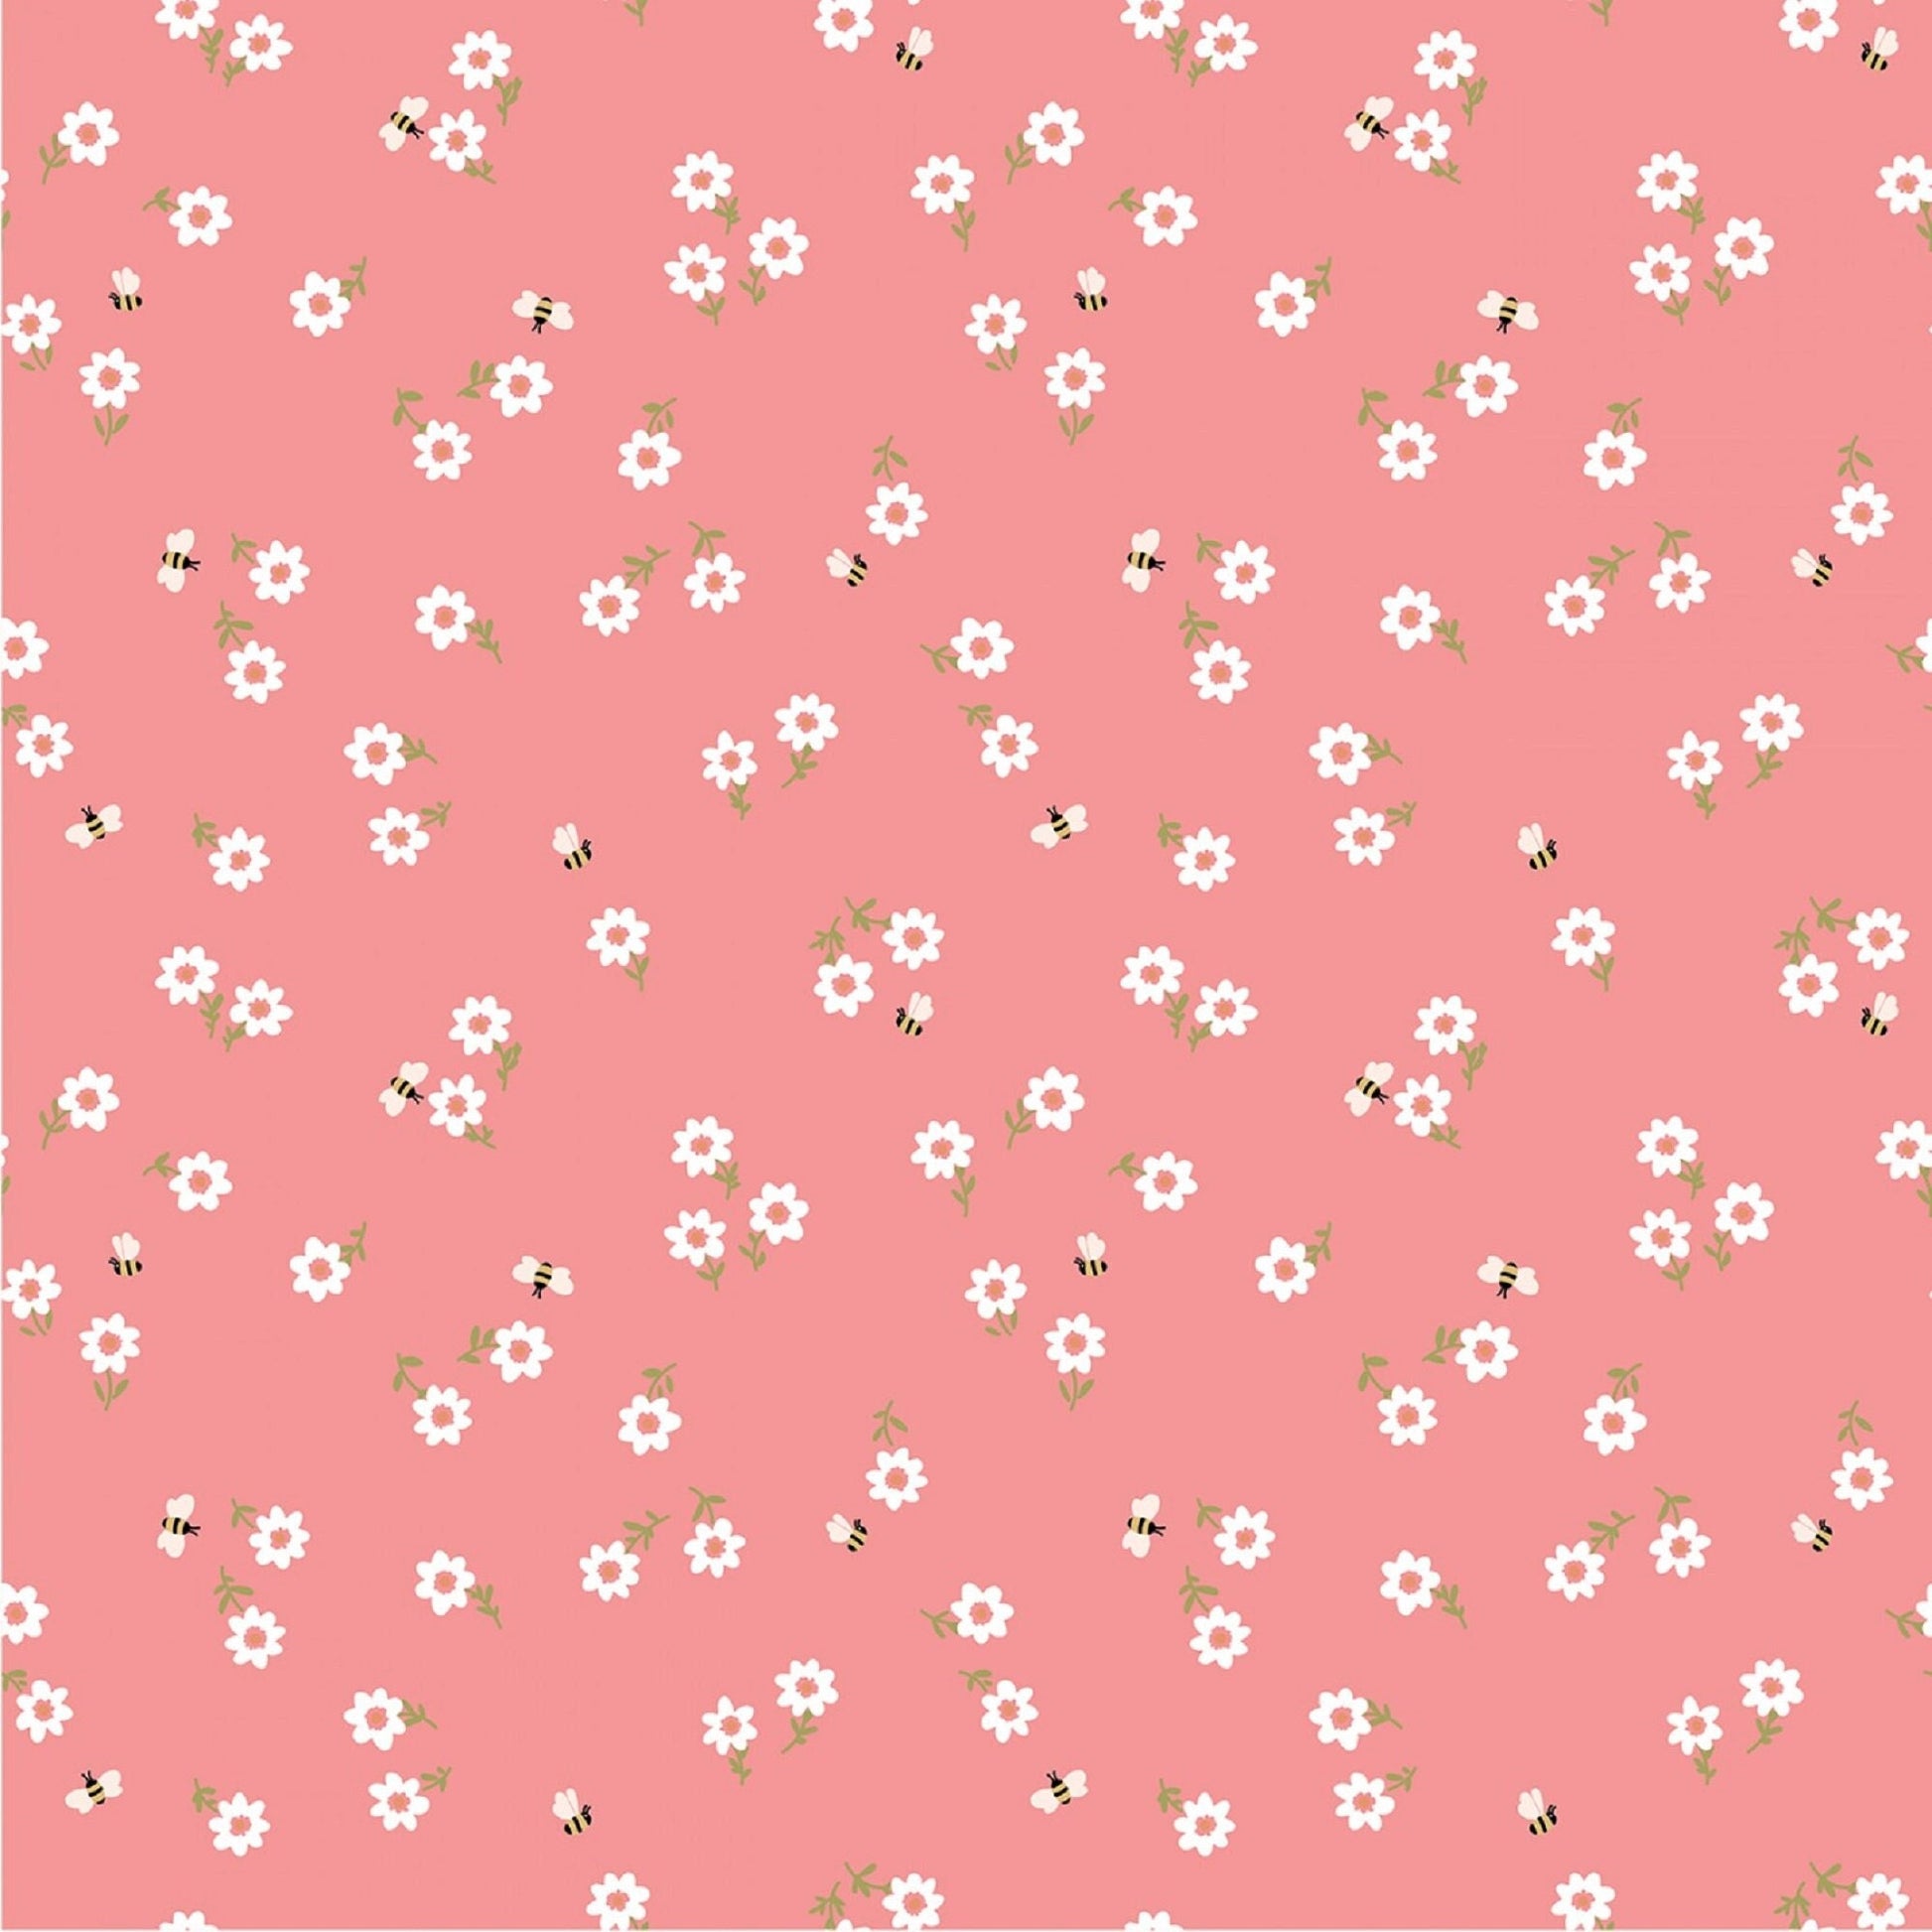 You're Invited Pink Promise Me Michal Marco Poppie Cotton Fabric 100% Quilters Cotton Fabric Fetish